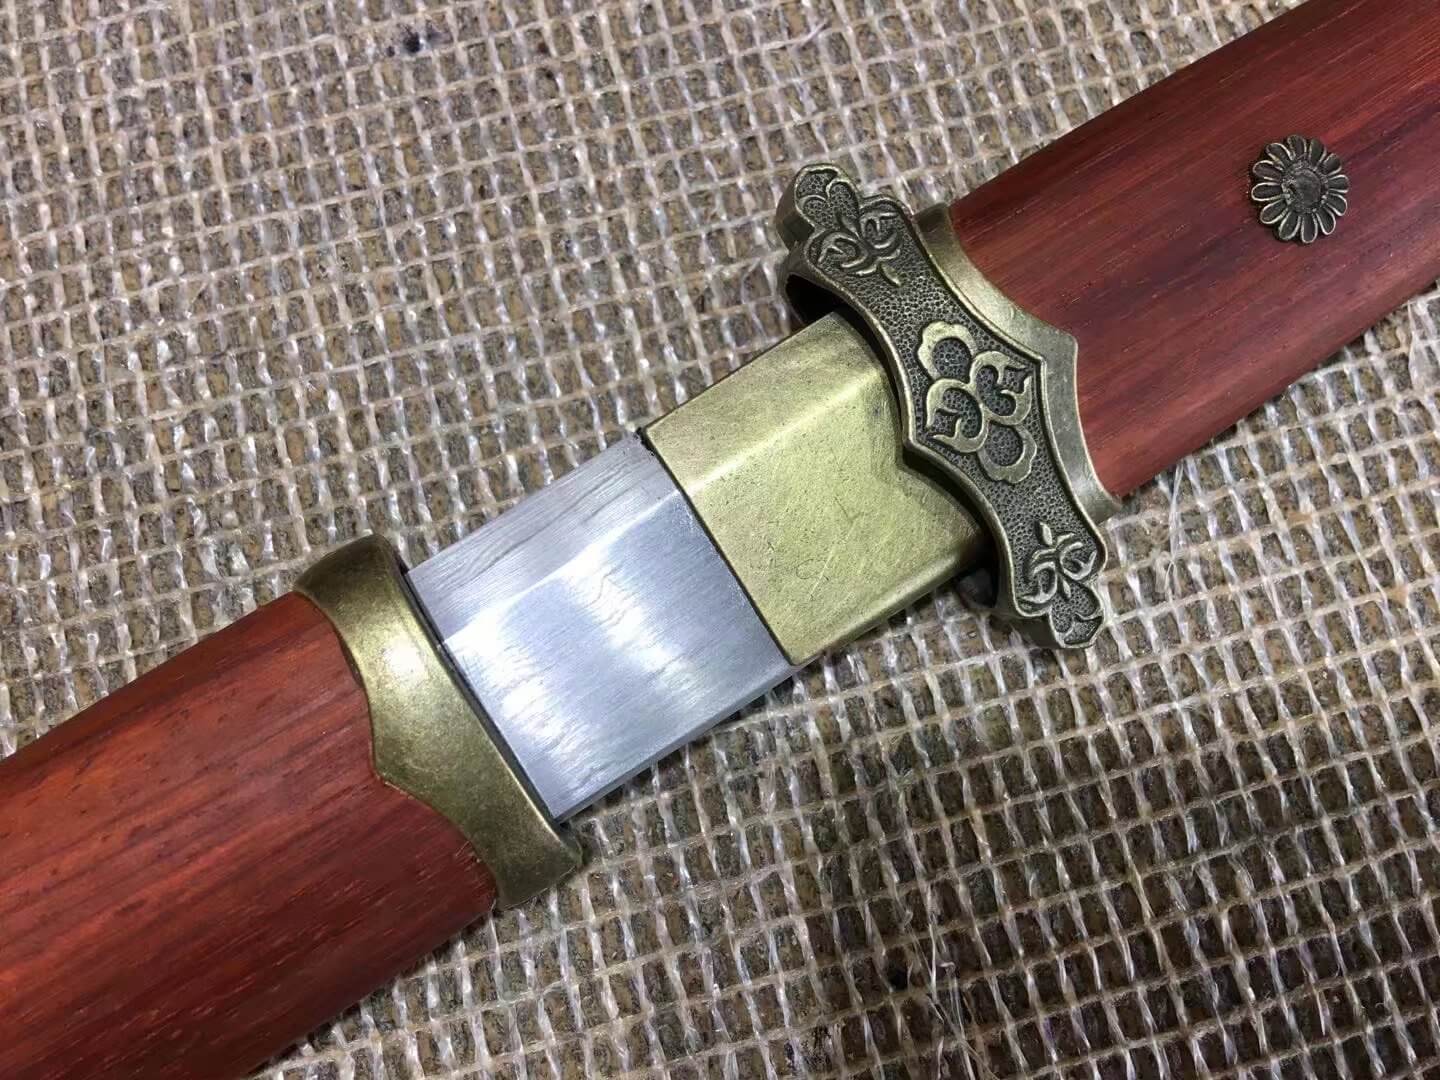 Tang dao,Damascus steel blade,Redwood scabbard,Alloy fitings,Full tang - Chinese sword shop